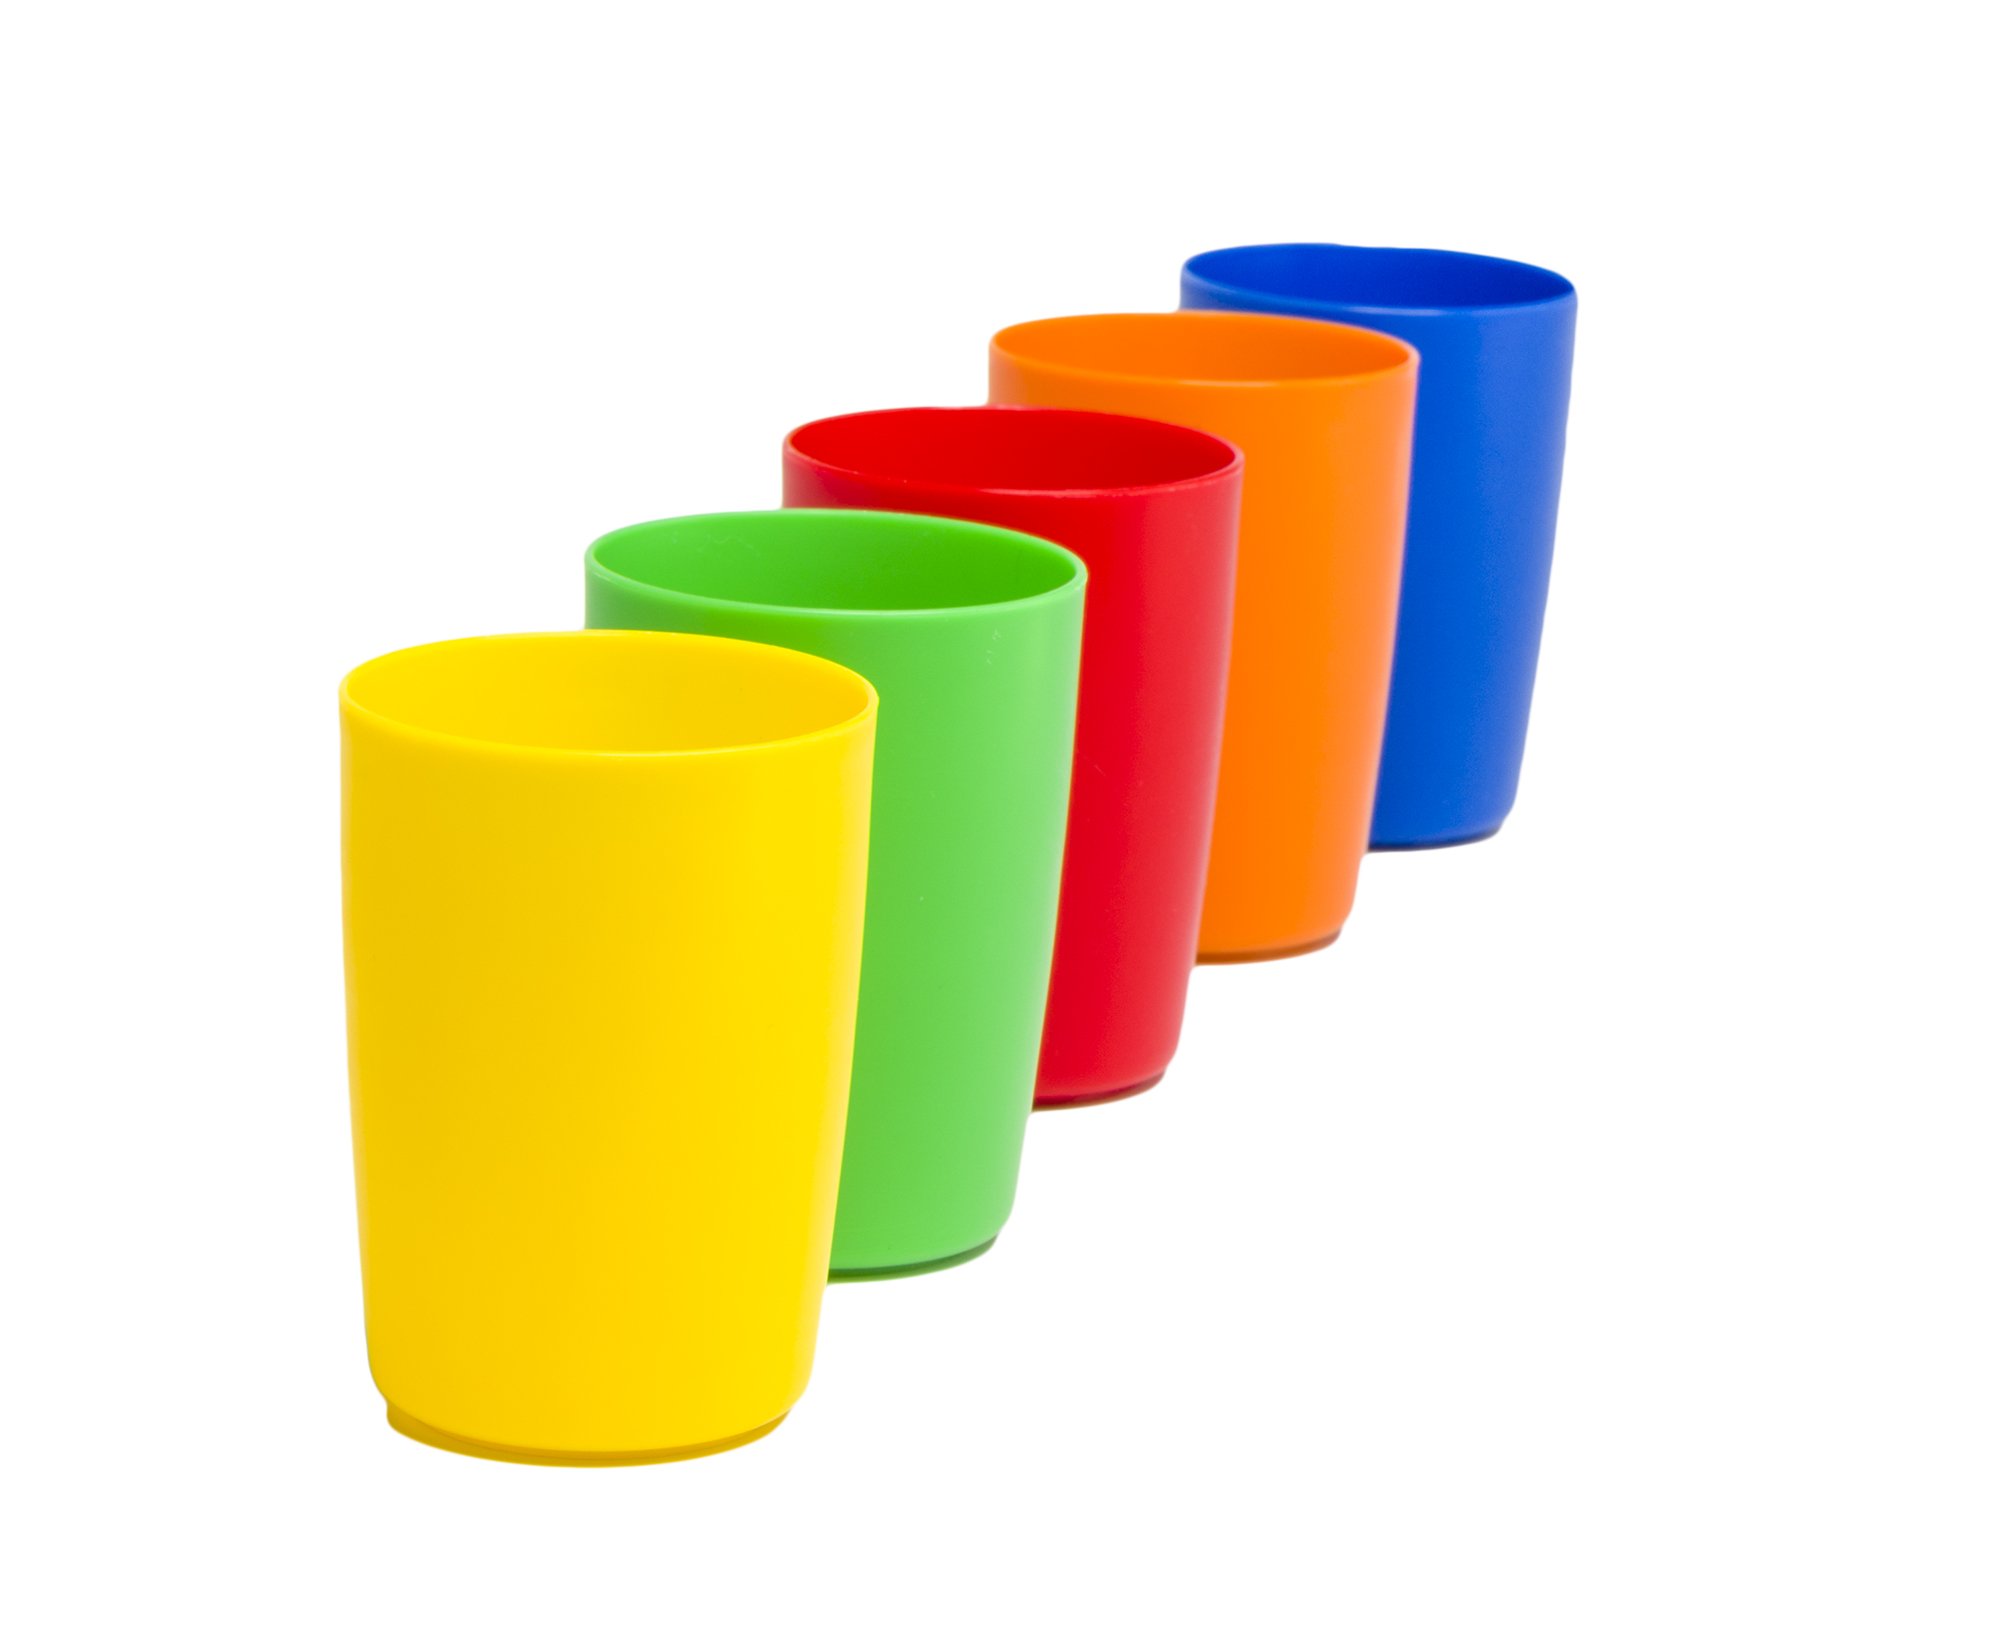 Greenco Small Plastic Cups for Kids, 5 pcs | Toddler Cups, Kid Glass, Drinking Glasses, Outdoor Cups, Reusable, Unbreakable, Colorful | Reusable Cup Set, Picnic Sets, Kitchen Set (Colors May Vary)